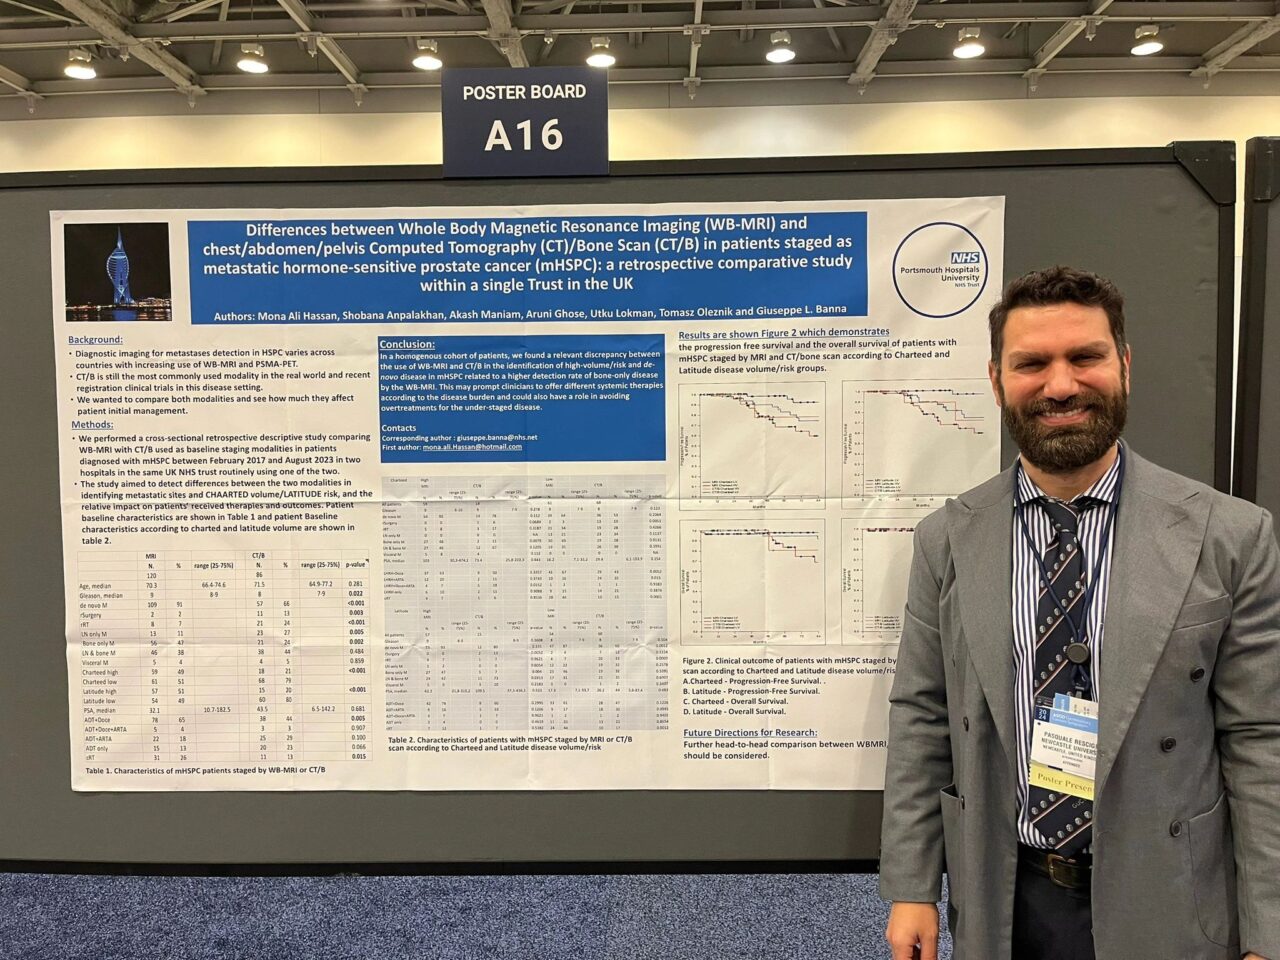 Aruni Ghose: Our amazing Prostate Cancer poster at ASCO GU24